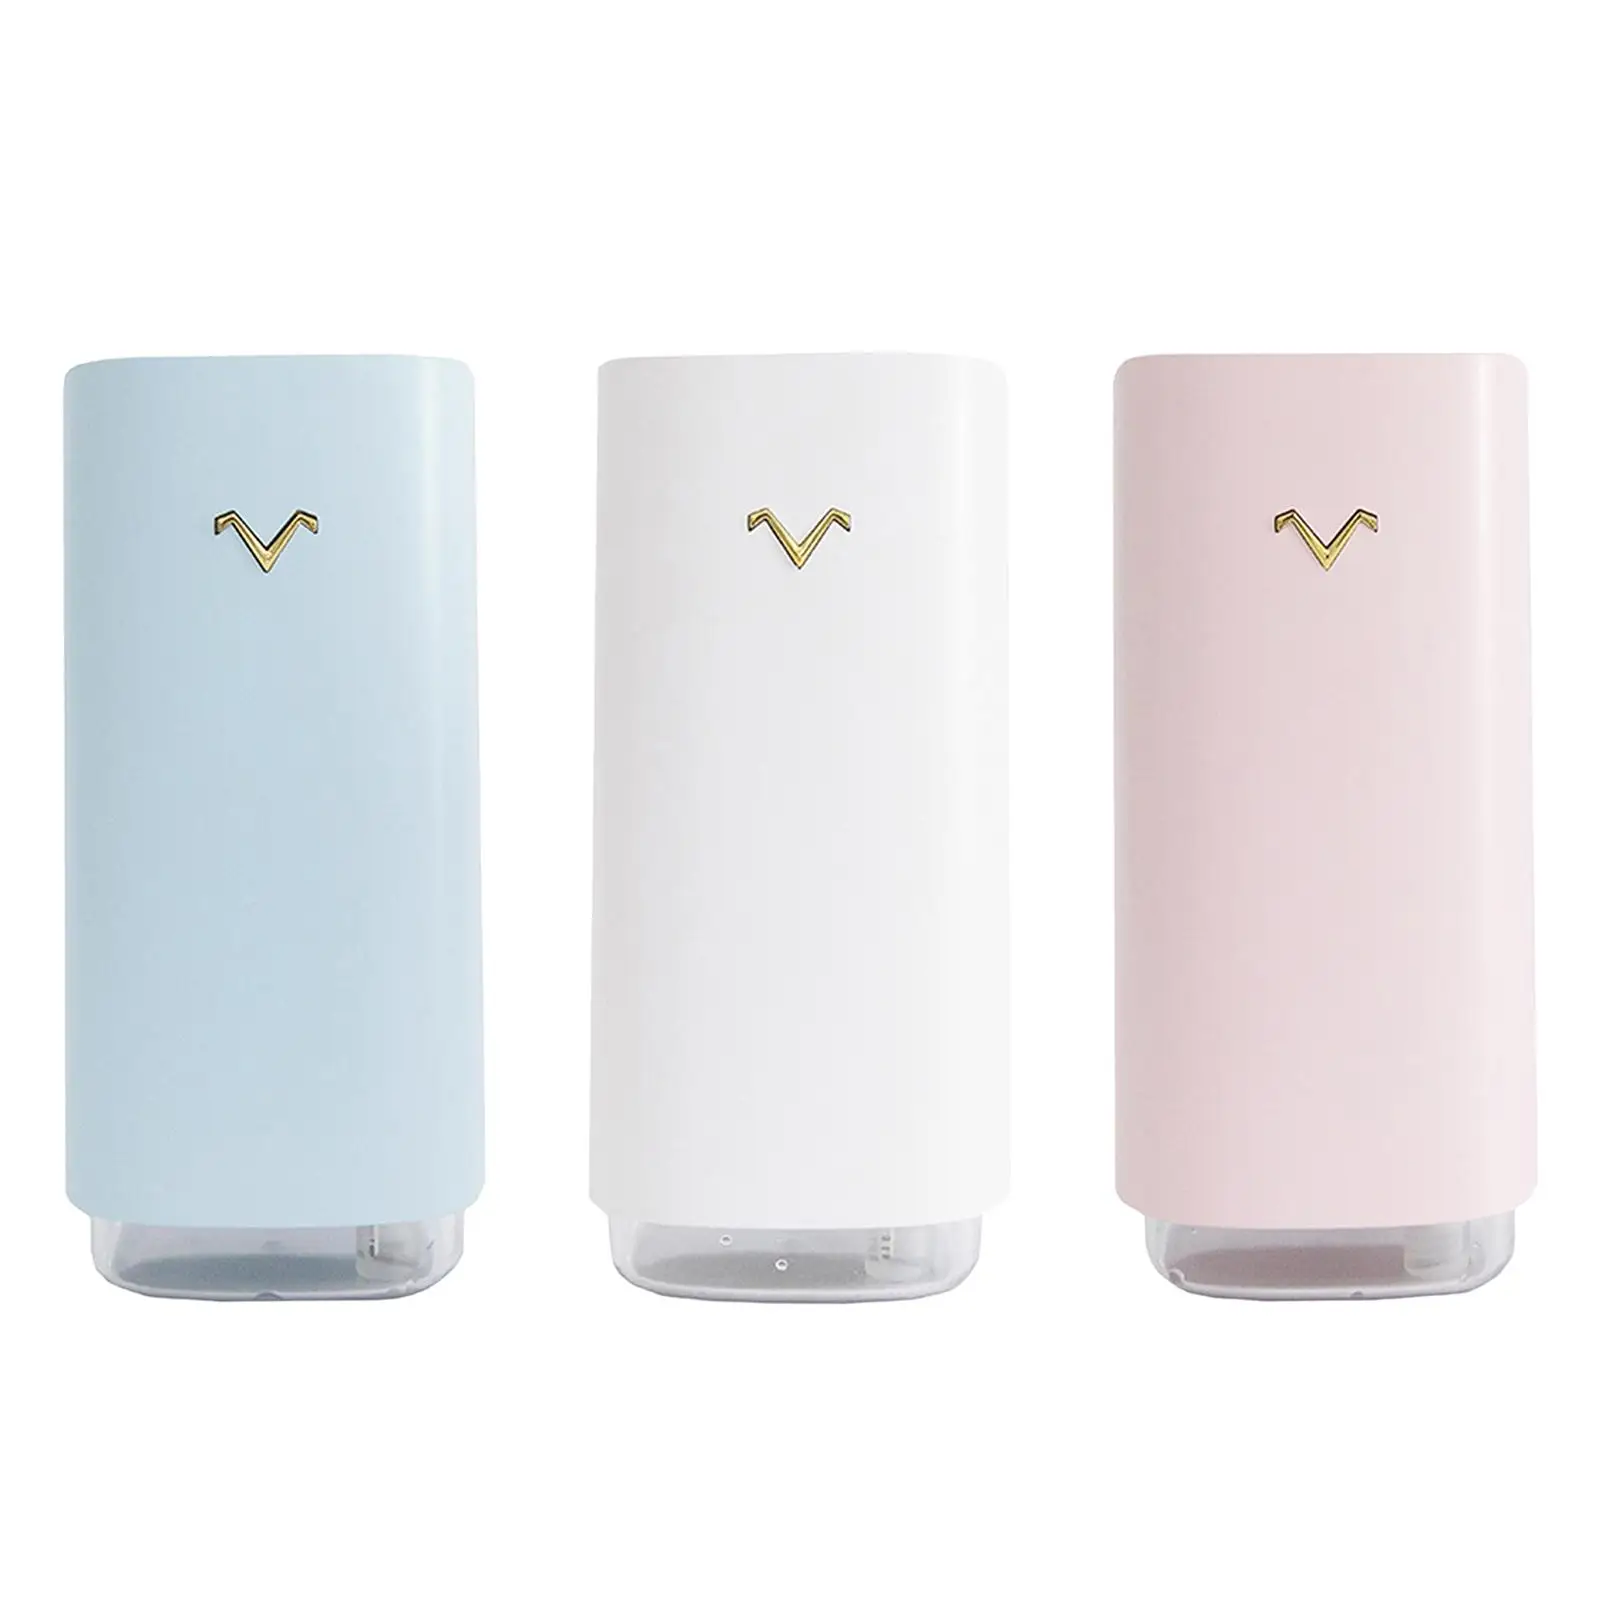 Portable Wireless Humidifier Purifier USB 45ml/H Spray Volume Essential Oil Aroma Diffuser Mist Maker for Children Room Car Home